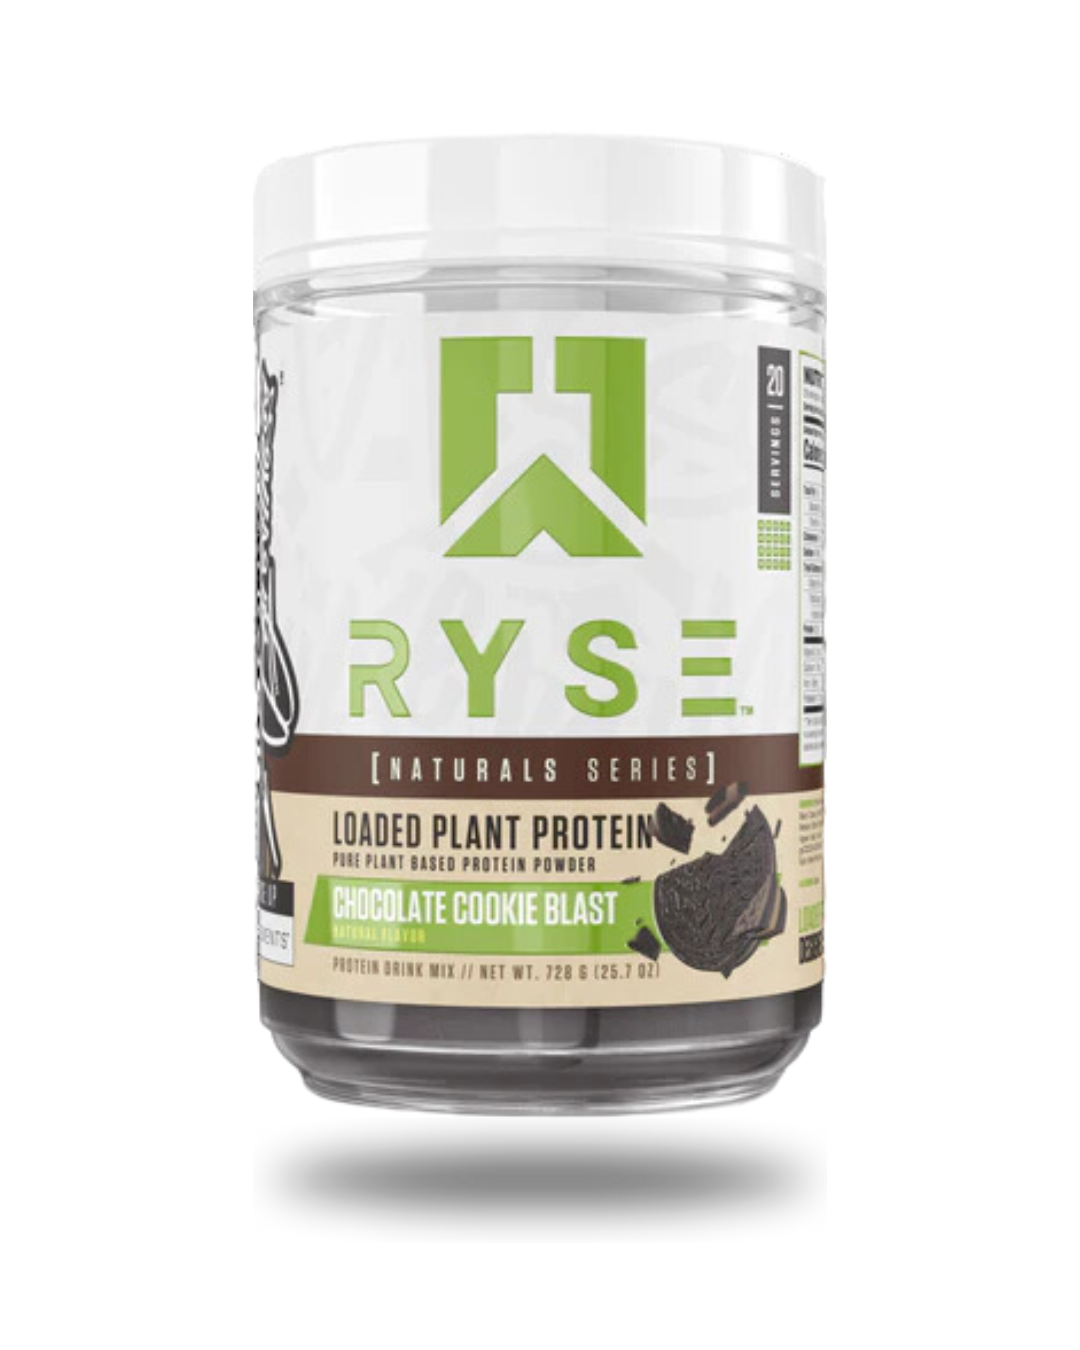 RYSE | Loaded Plant Protein (Natural Series)